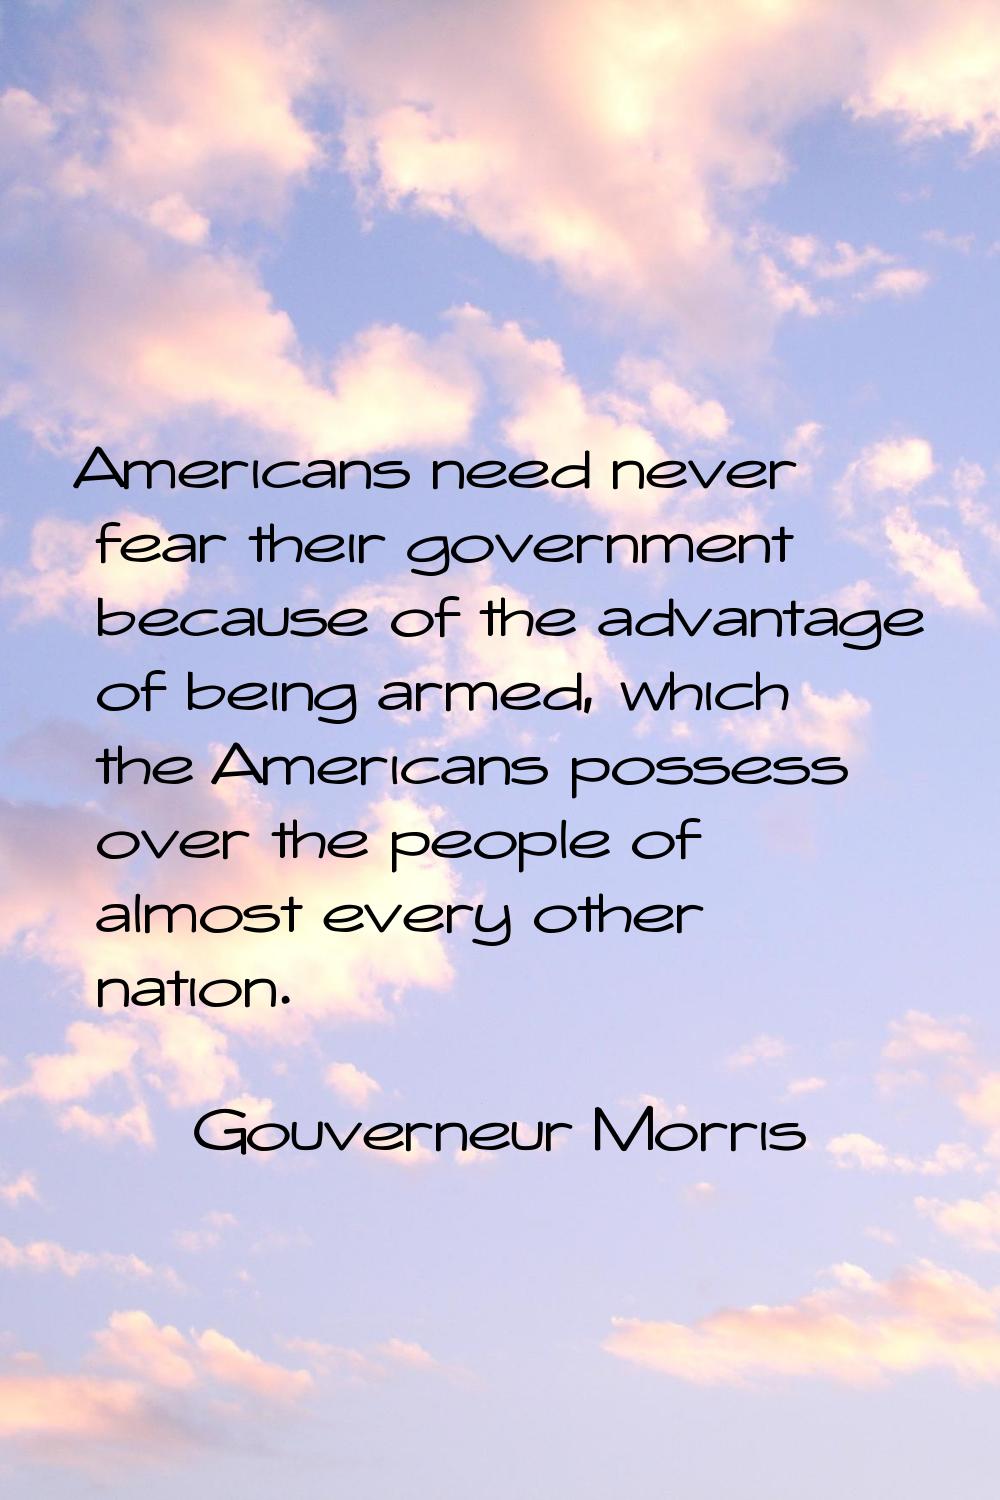 Americans need never fear their government because of the advantage of being armed, which the Ameri